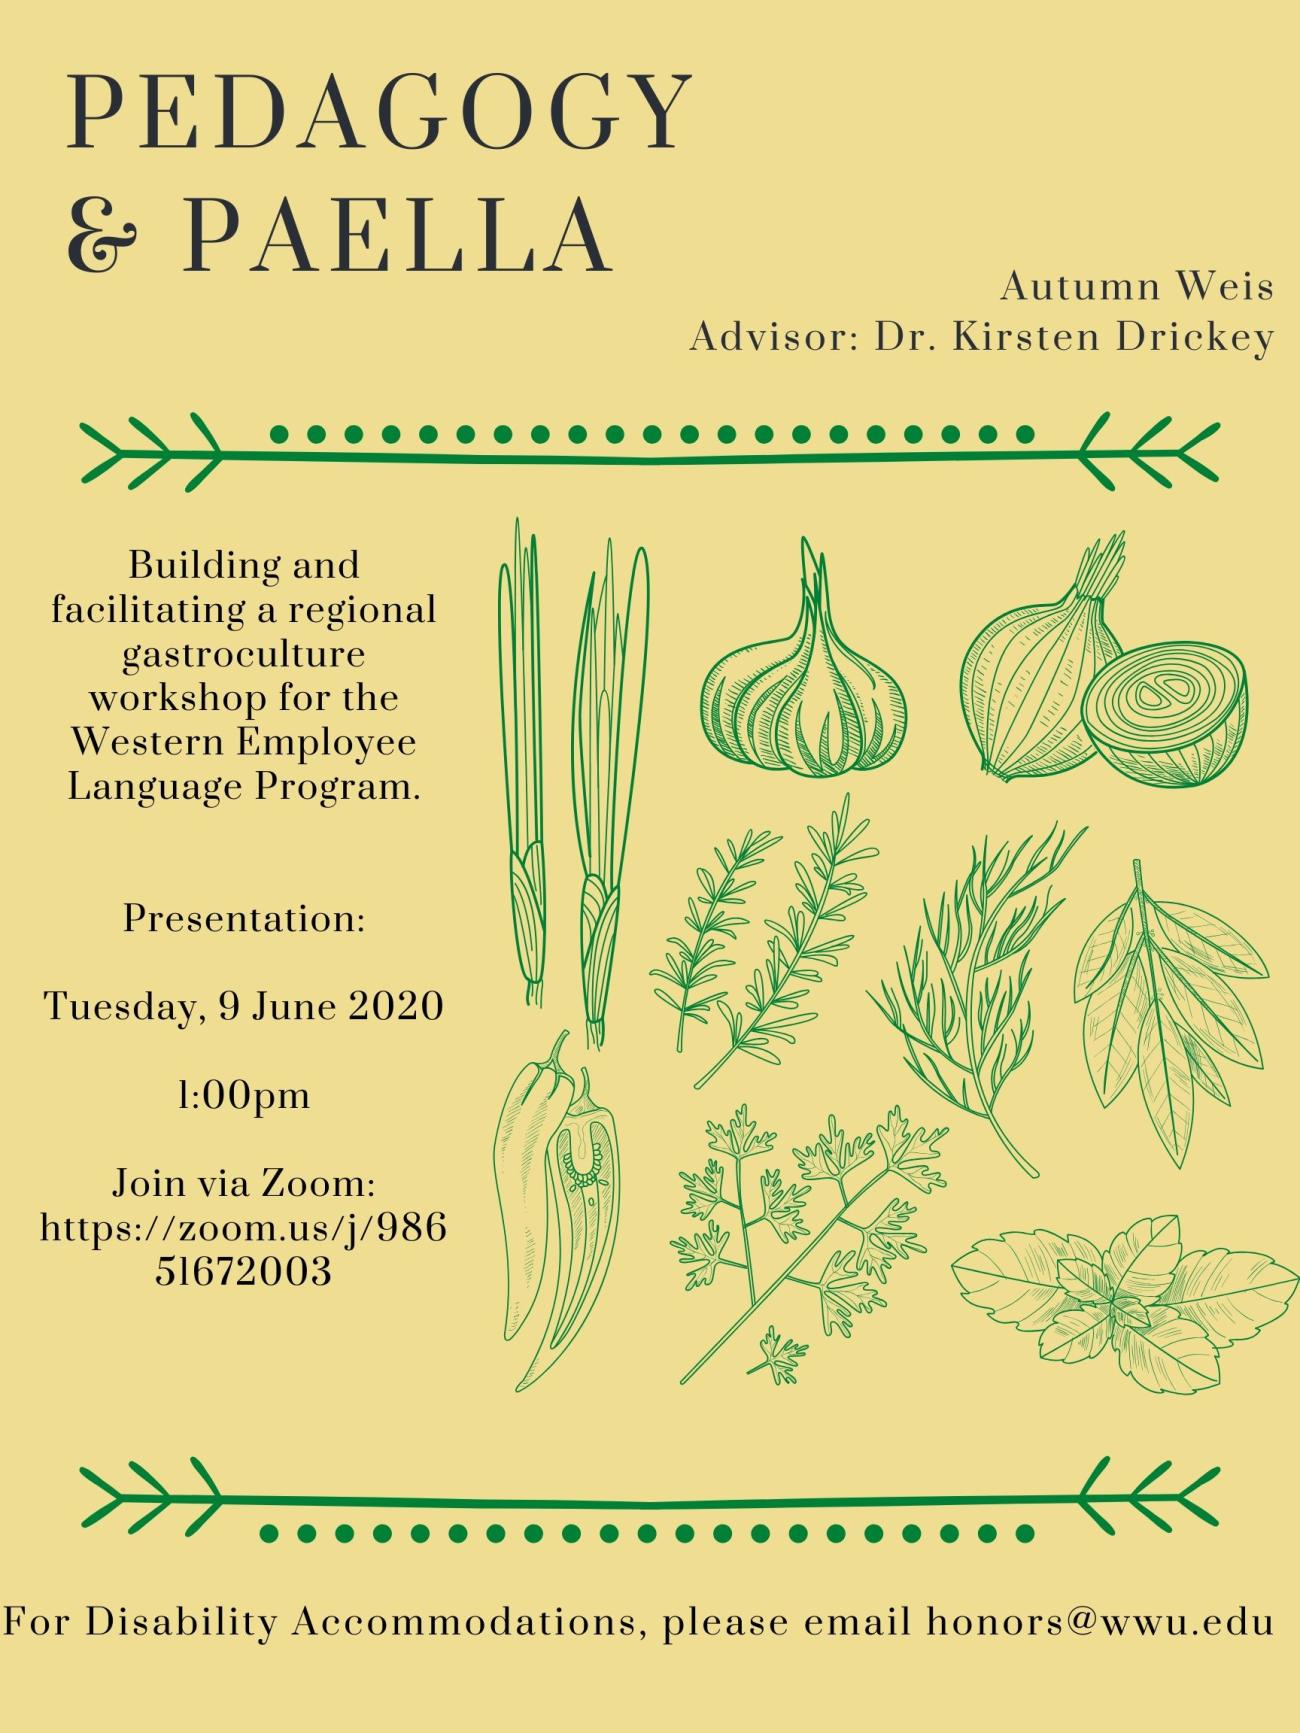 Rustic sketch-form vegetables and sundry produce Text reads "Pedagogy and Paella. Building and facilitating a regional gastroculture workshop for the Western Employee Language Program."  "Presenter: Autumn Weis. Advisor: Kirsten Drickey"  "Presentation Tuesday 9 June, 2020. 1:00pm"